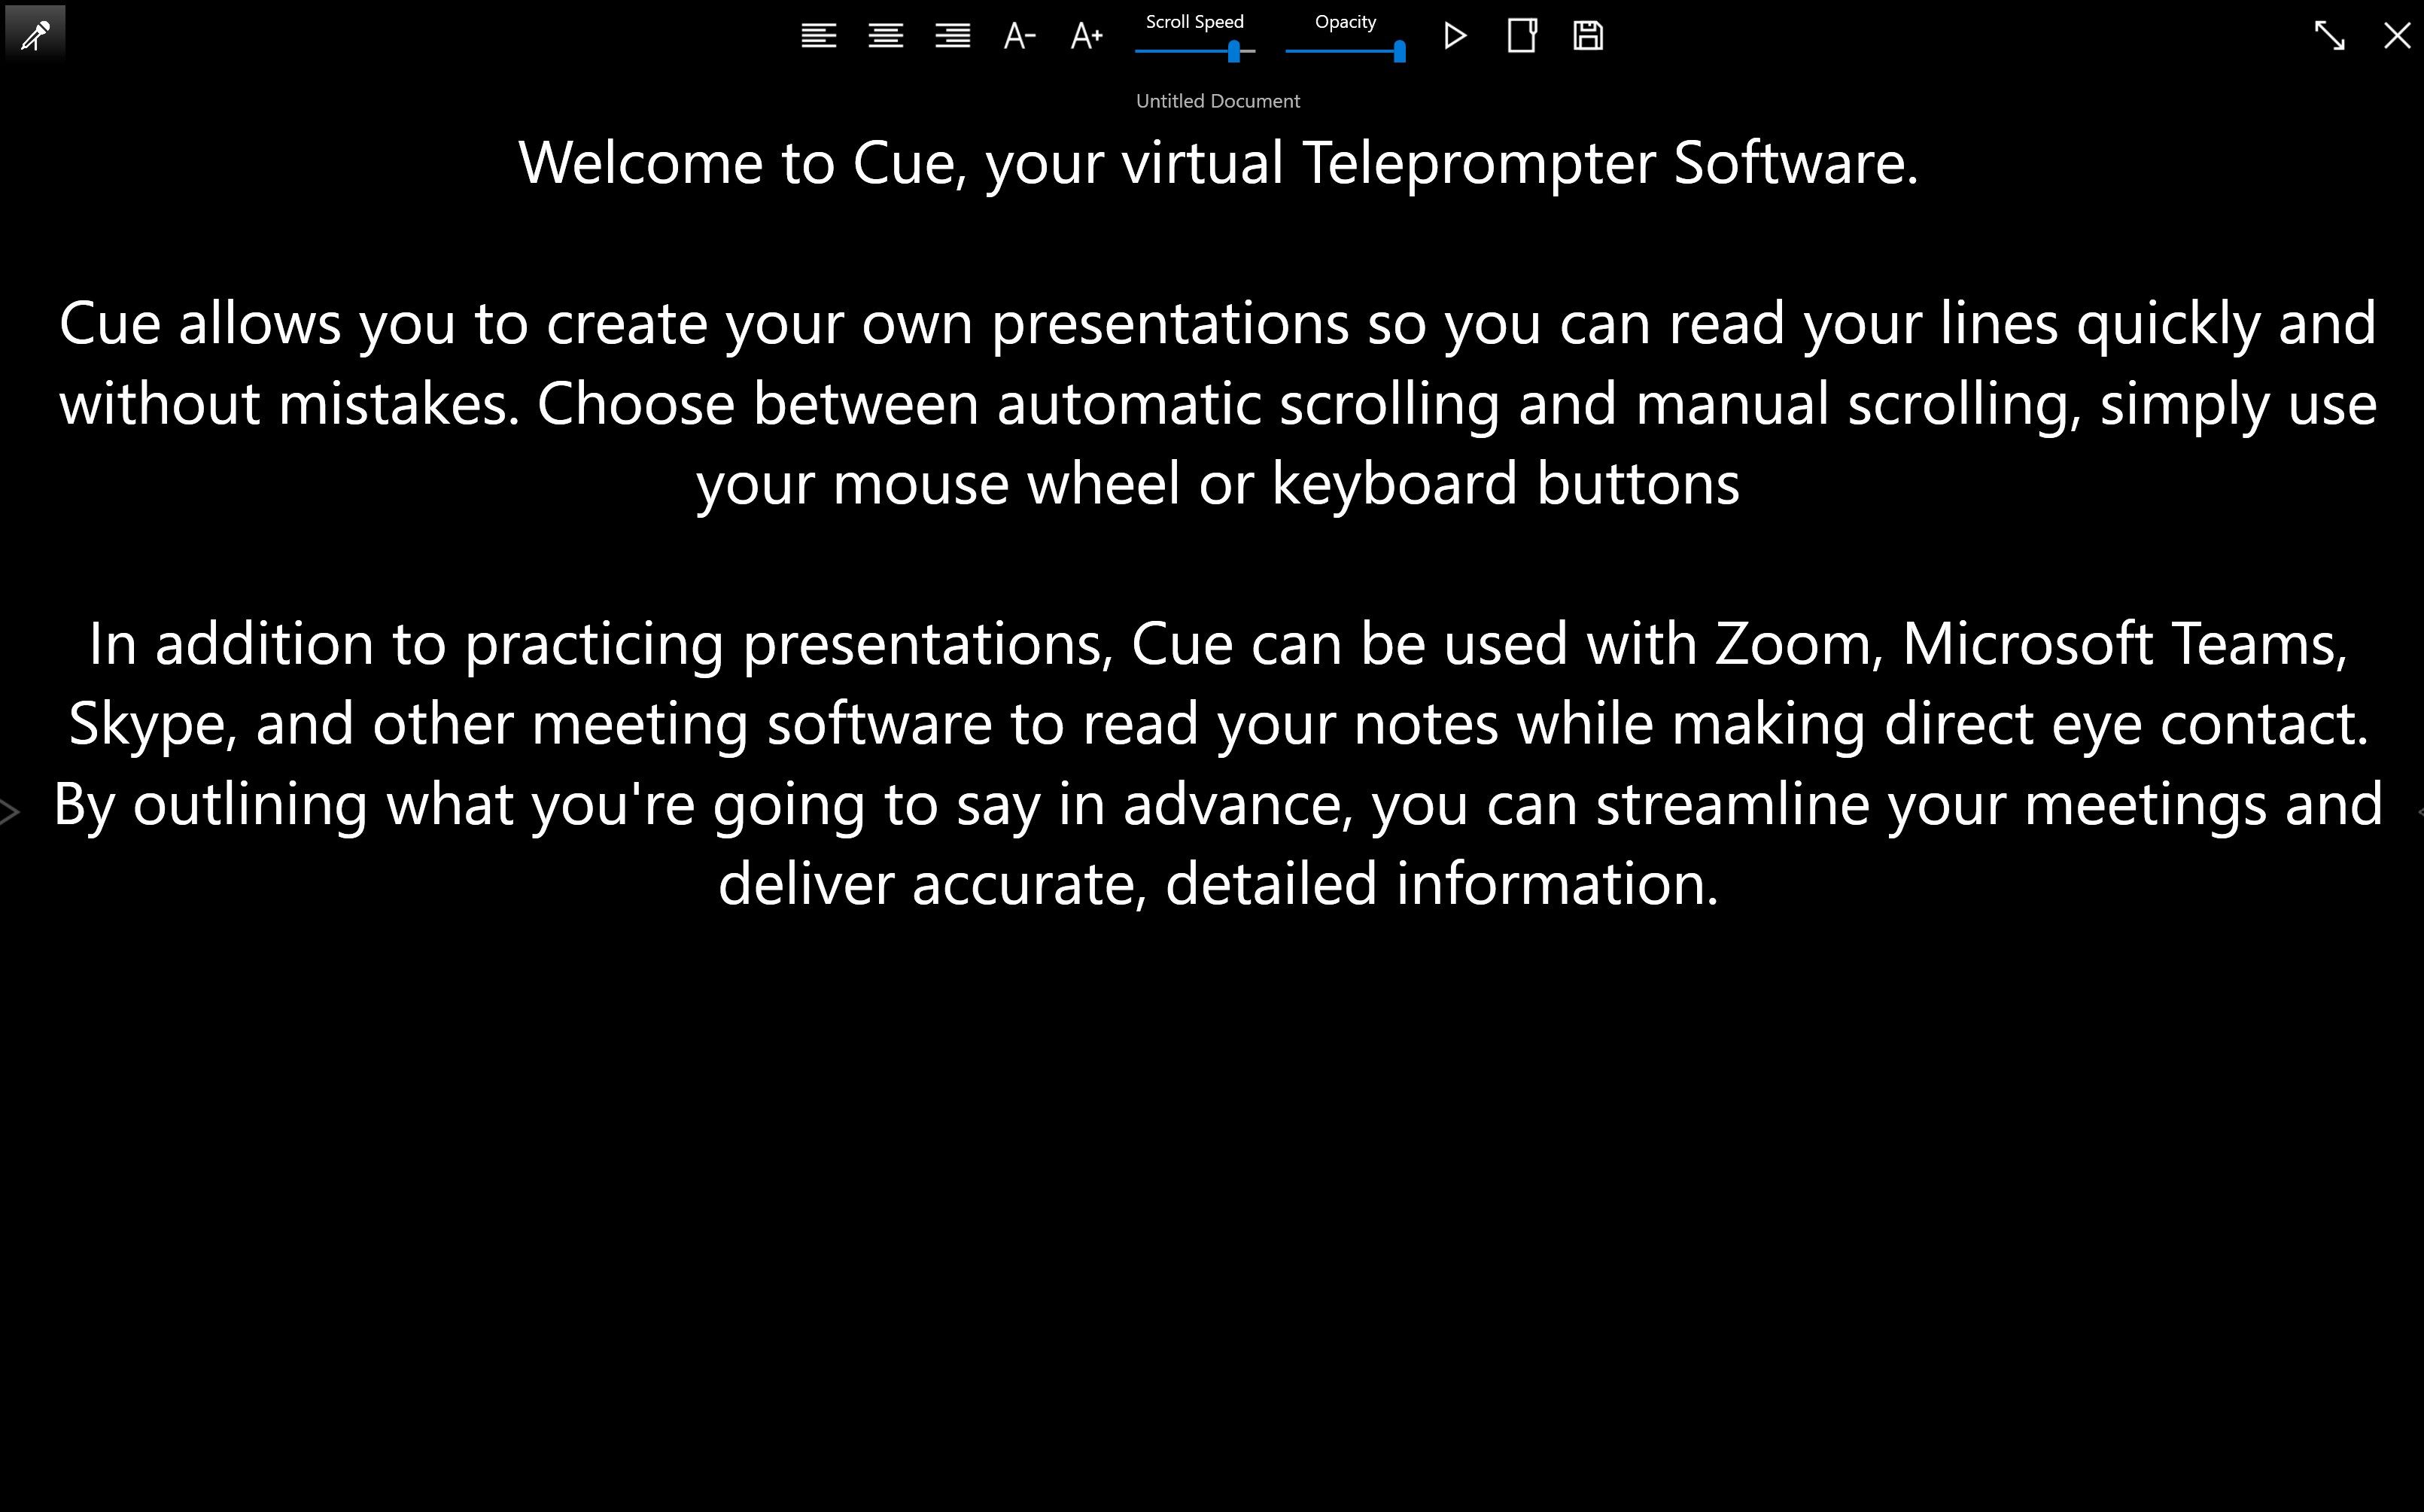 Cue - Easy Virtual Teleprompter